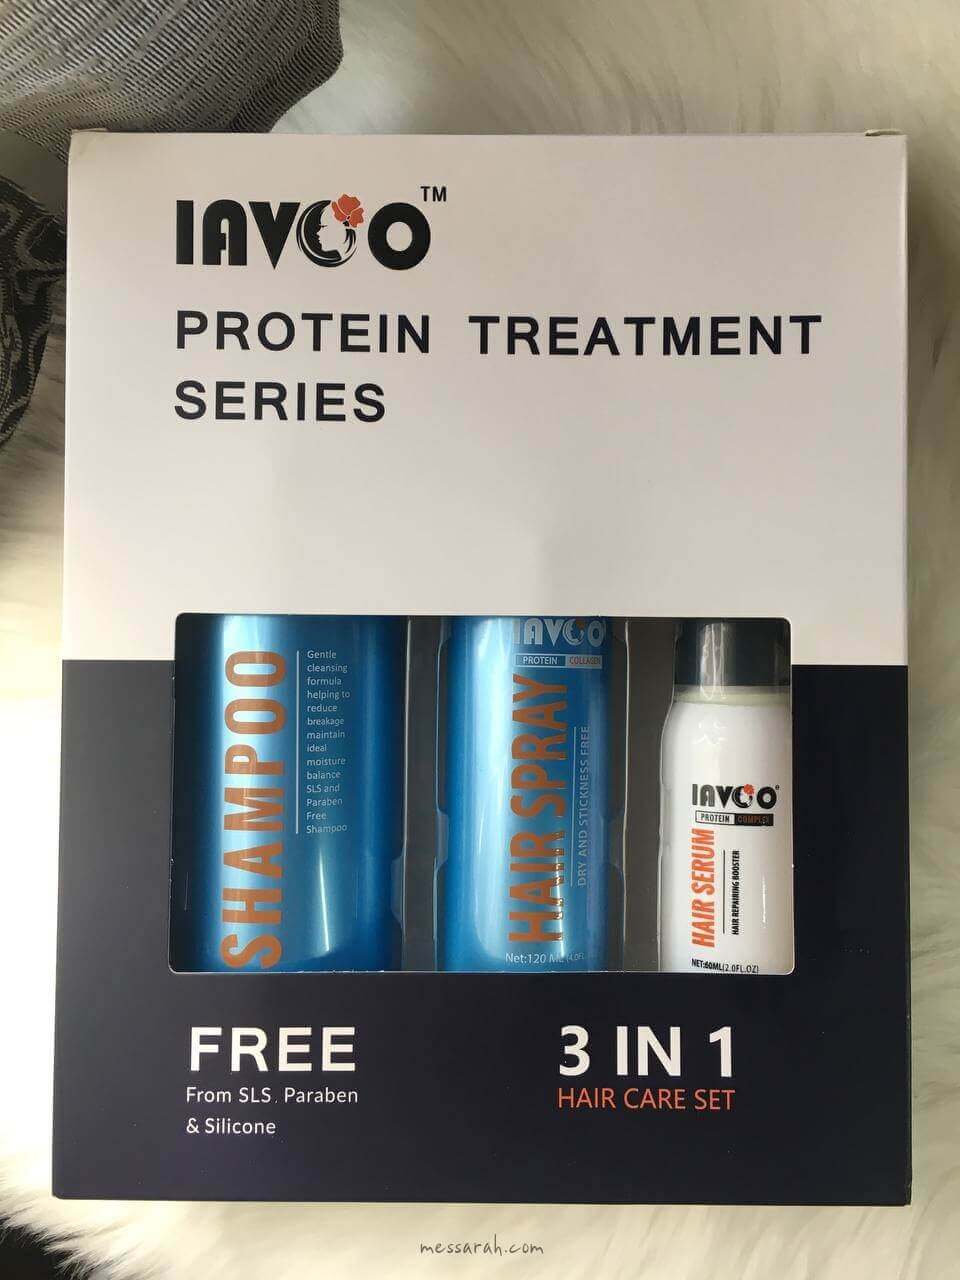 Lavoo 3-in-1 Protein Treatment Series